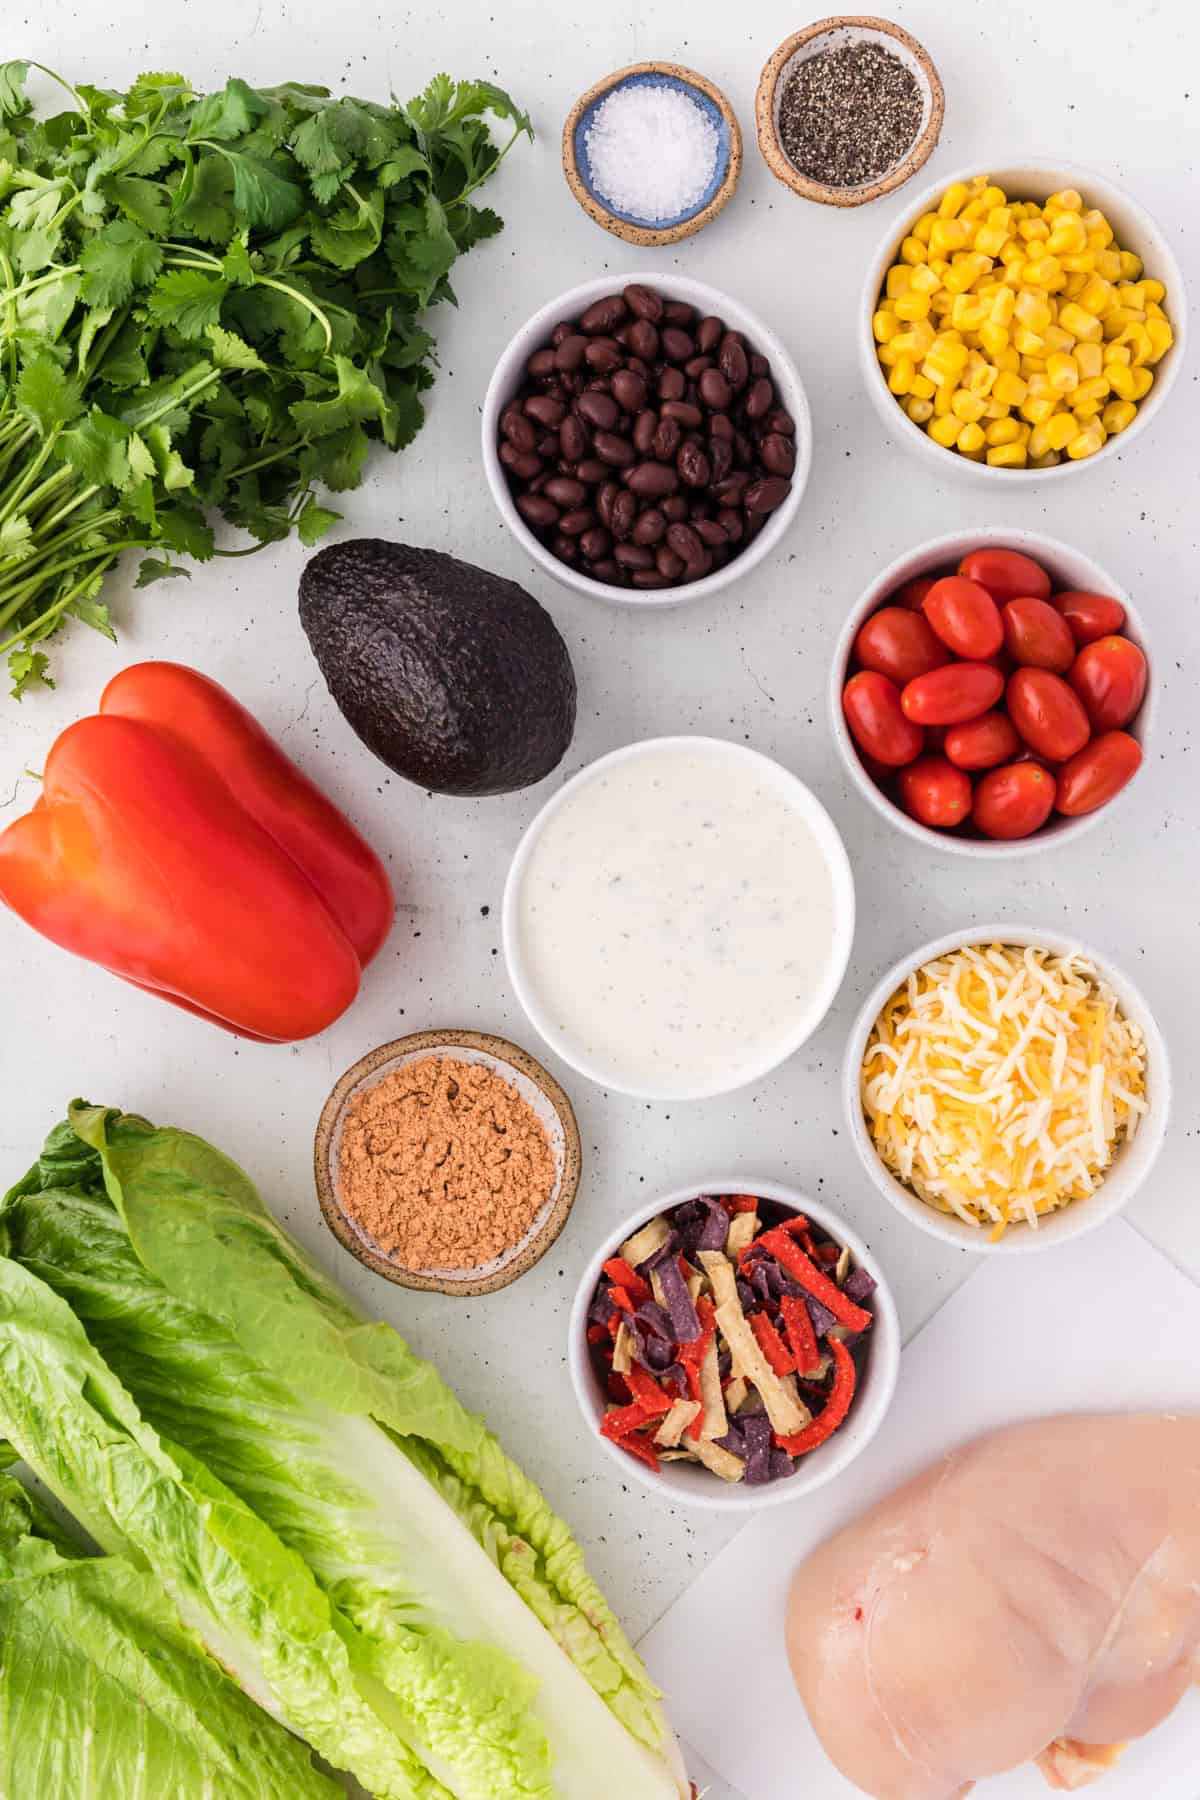 Ingredients needed to make a Southwest Salad.